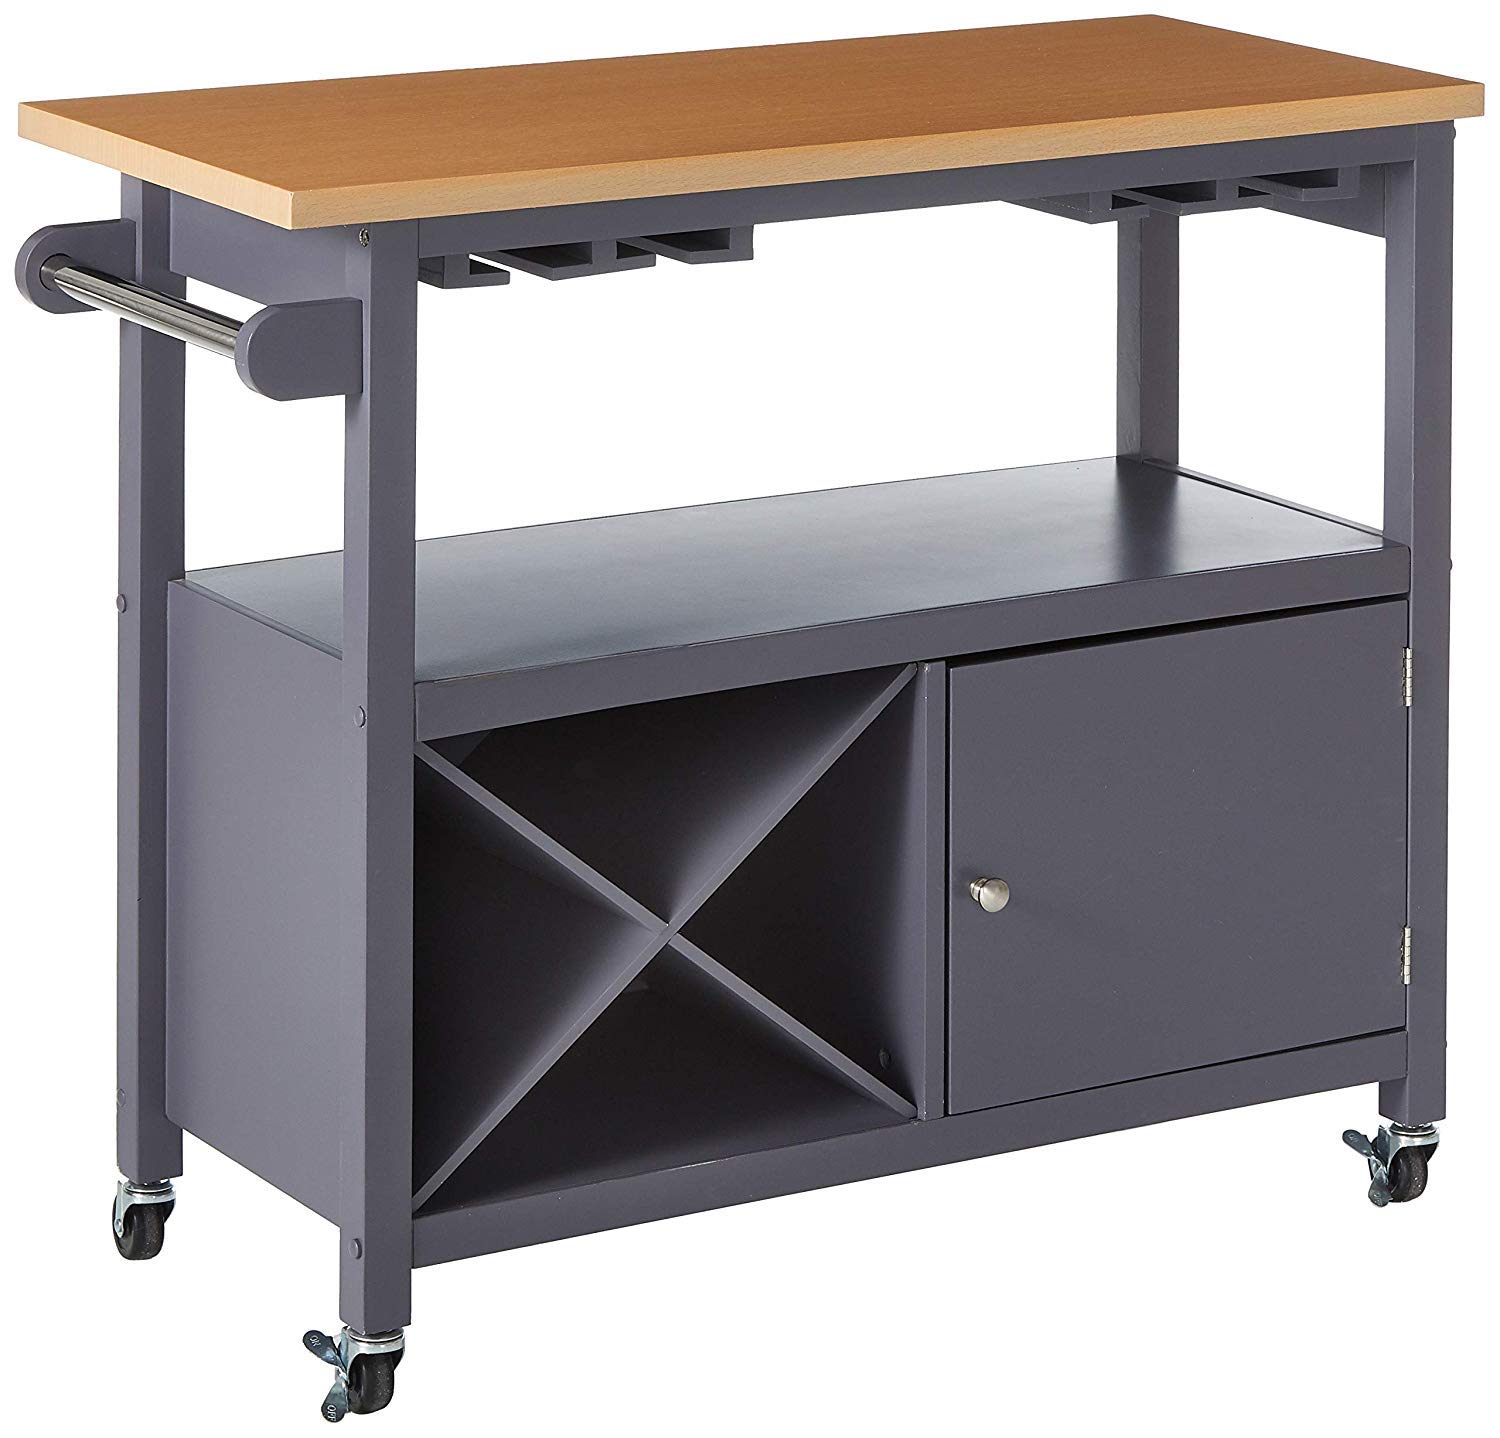 Jose Portable Kitchen Island Serving Cart With Storage Cabinet & Wine Rack, Gray & Natural Wood, Transitional - image 2 of 7